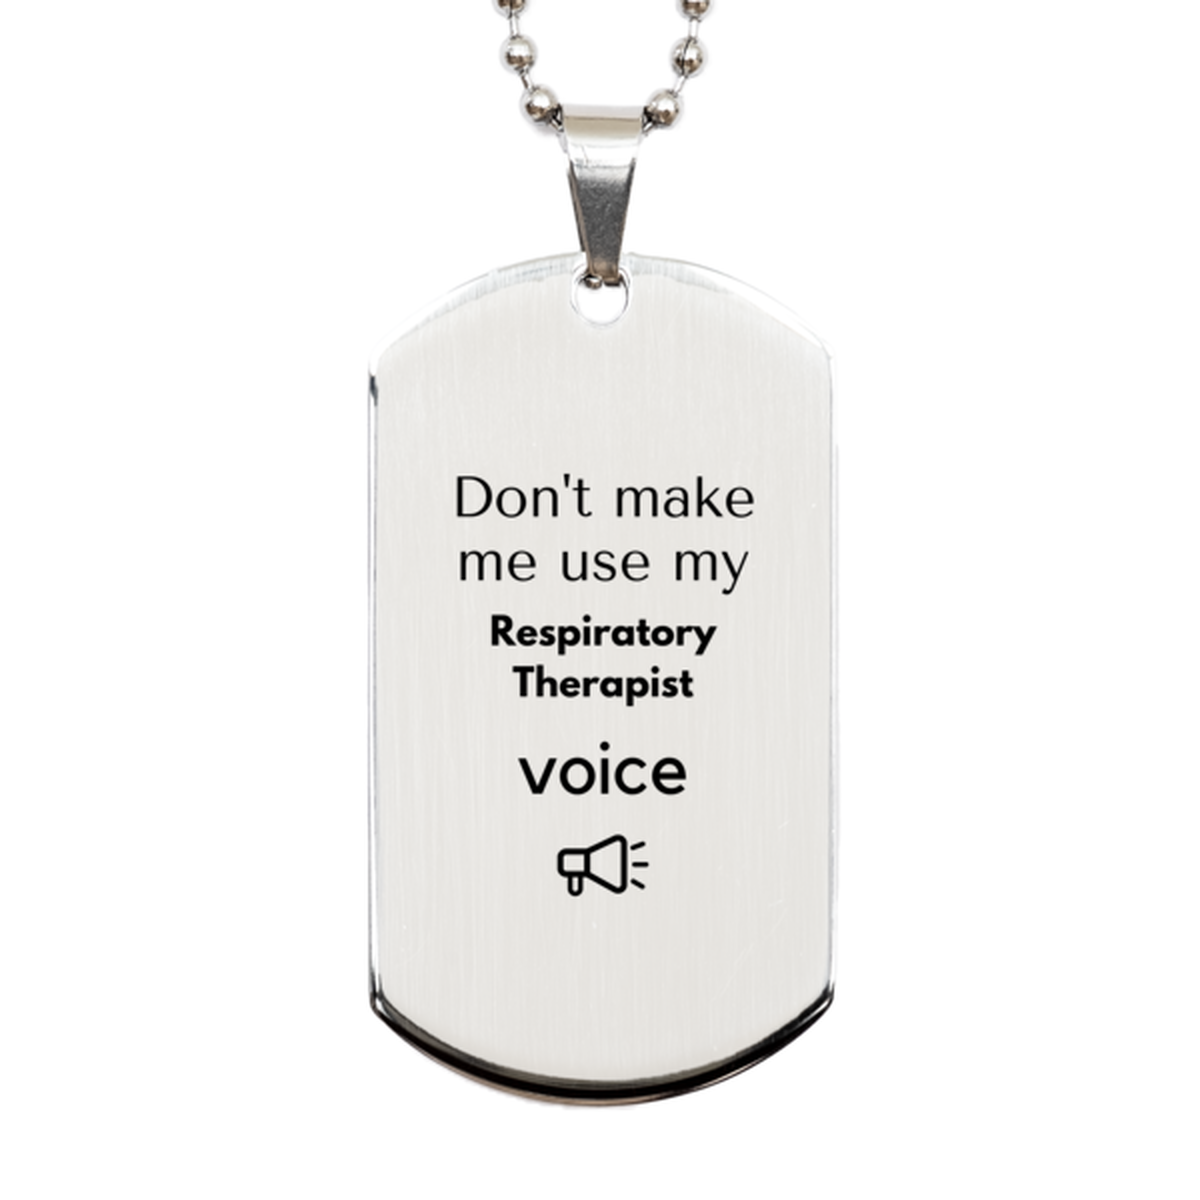 Don't make me use my Respiratory Therapist voice, Sarcasm Respiratory Therapist Gifts, Christmas Respiratory Therapist Silver Dog Tag Birthday Unique Gifts For Respiratory Therapist Coworkers, Men, Women, Colleague, Friends